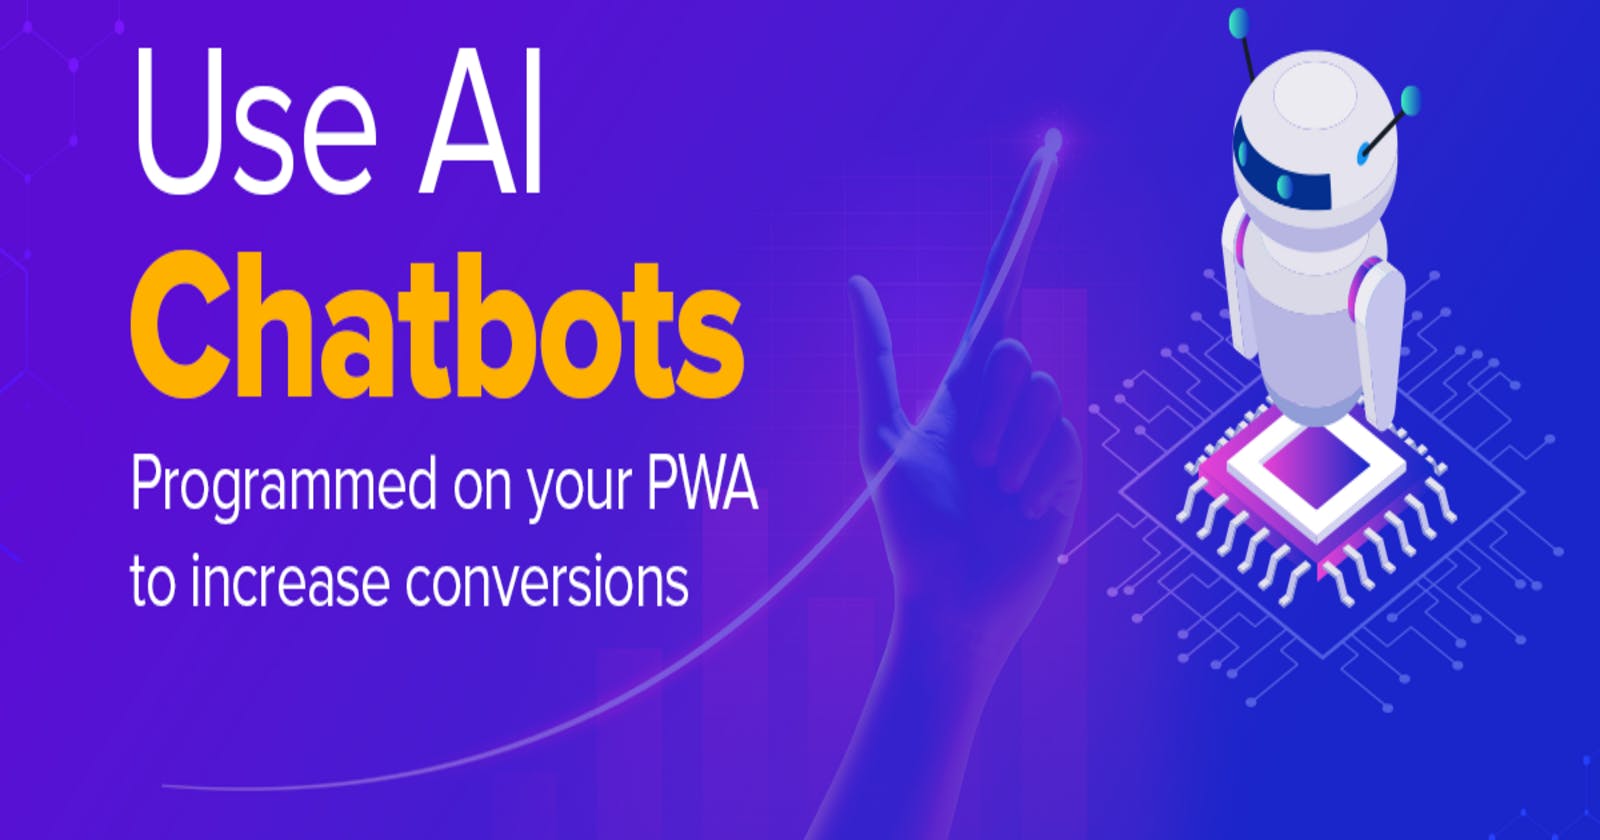 Use AI Chatbots Programmed on Your PWA to Increase Conversions